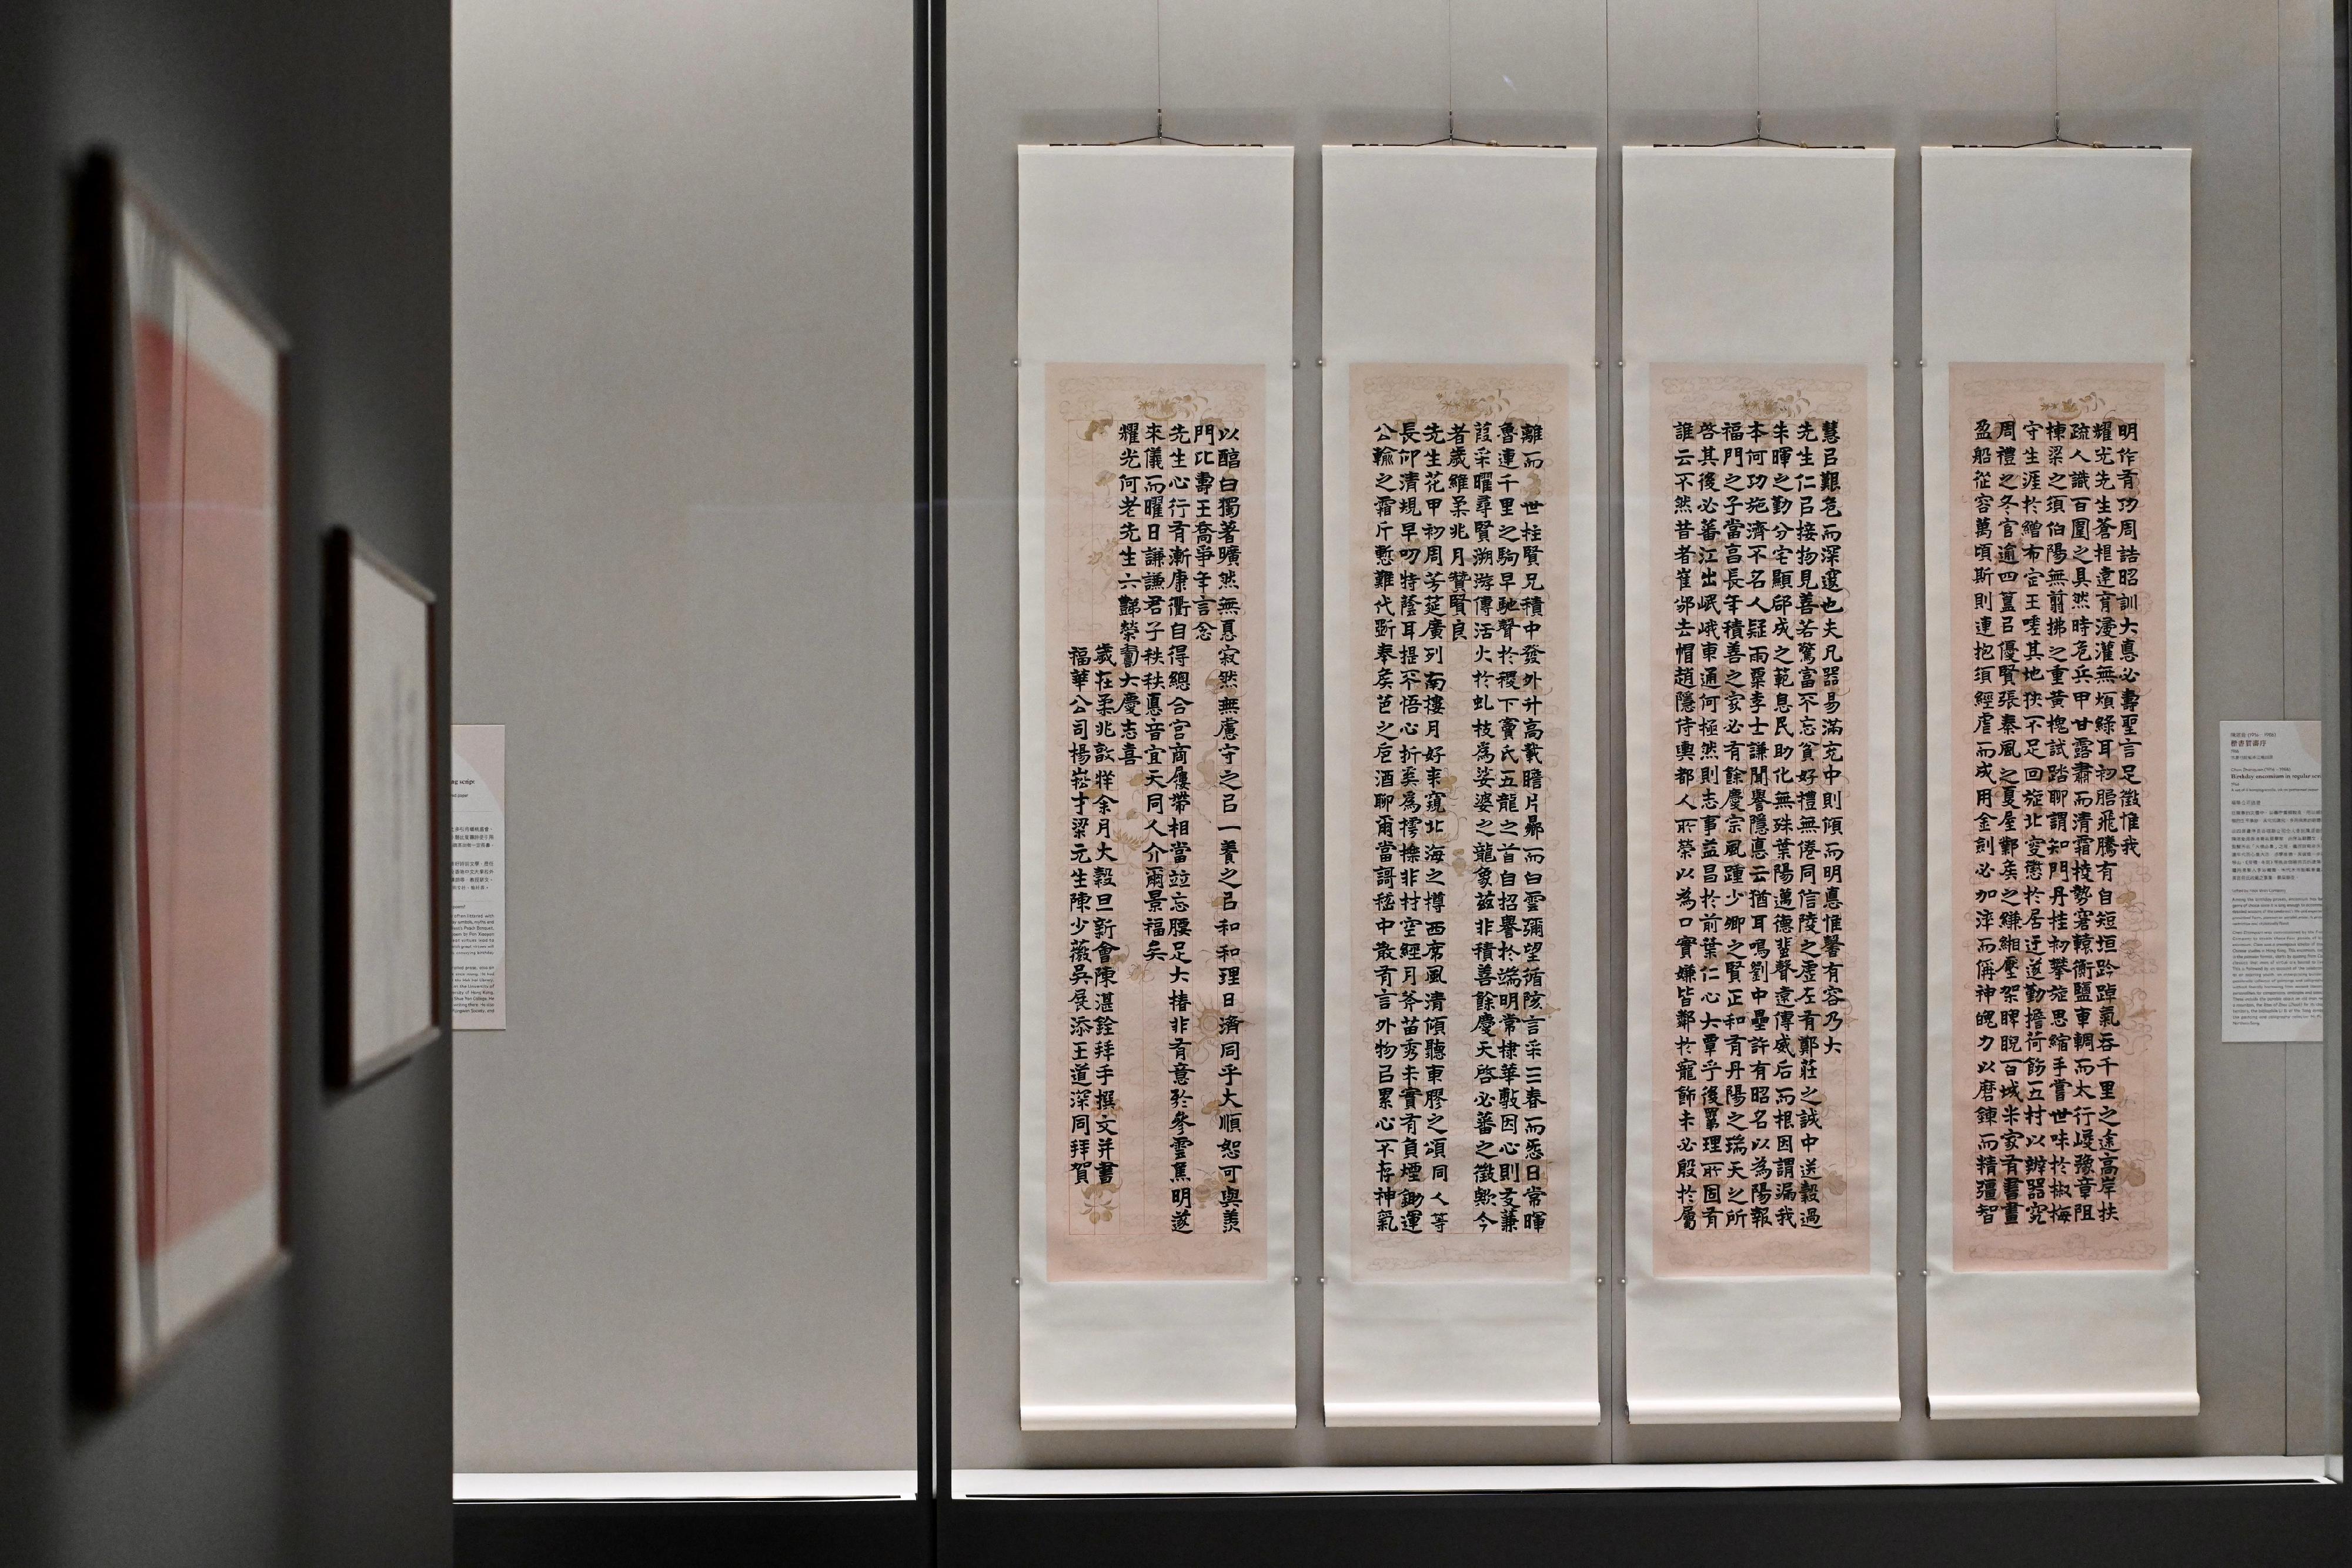 "Beyond Blessings: Birthday Greetings for the Master of Chih Lo Lou" exhibition will be held at the Hong Kong Museum of Art from tomorrow (July 14). Picture shows Chen Zhanquan's "Birthday Encomium in Regular Script".